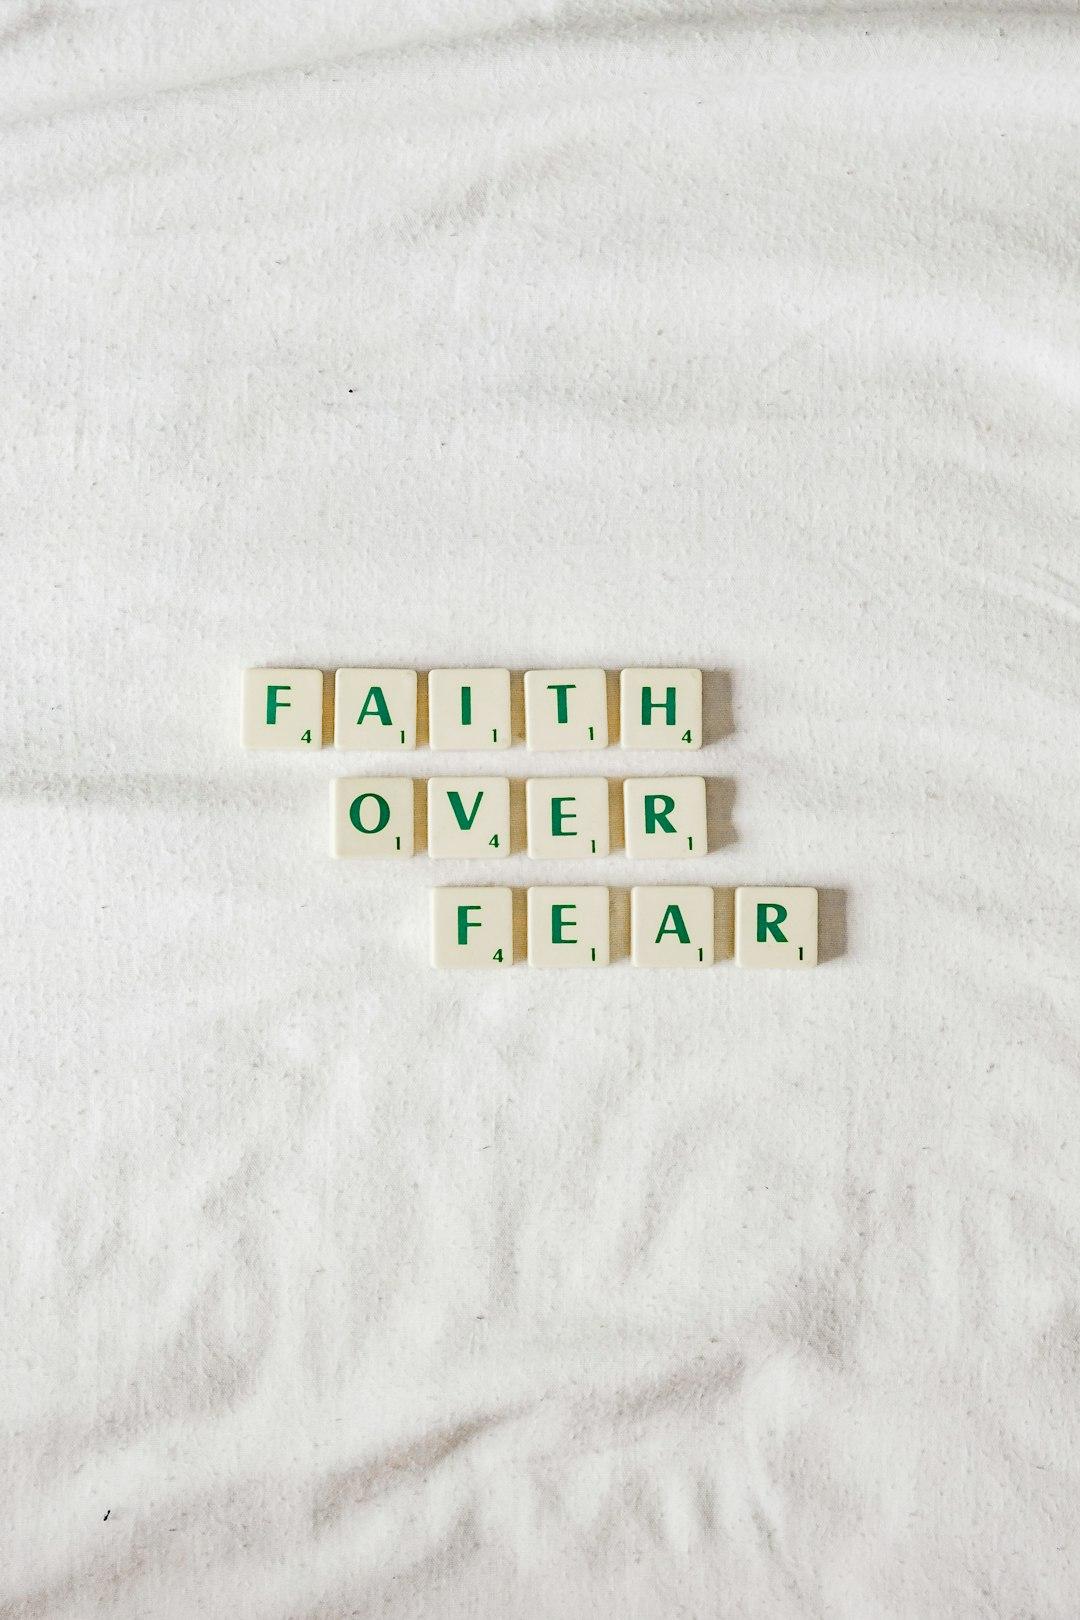 MAY YOUR FAITH BE STRONGER THAN YOUR FEAR